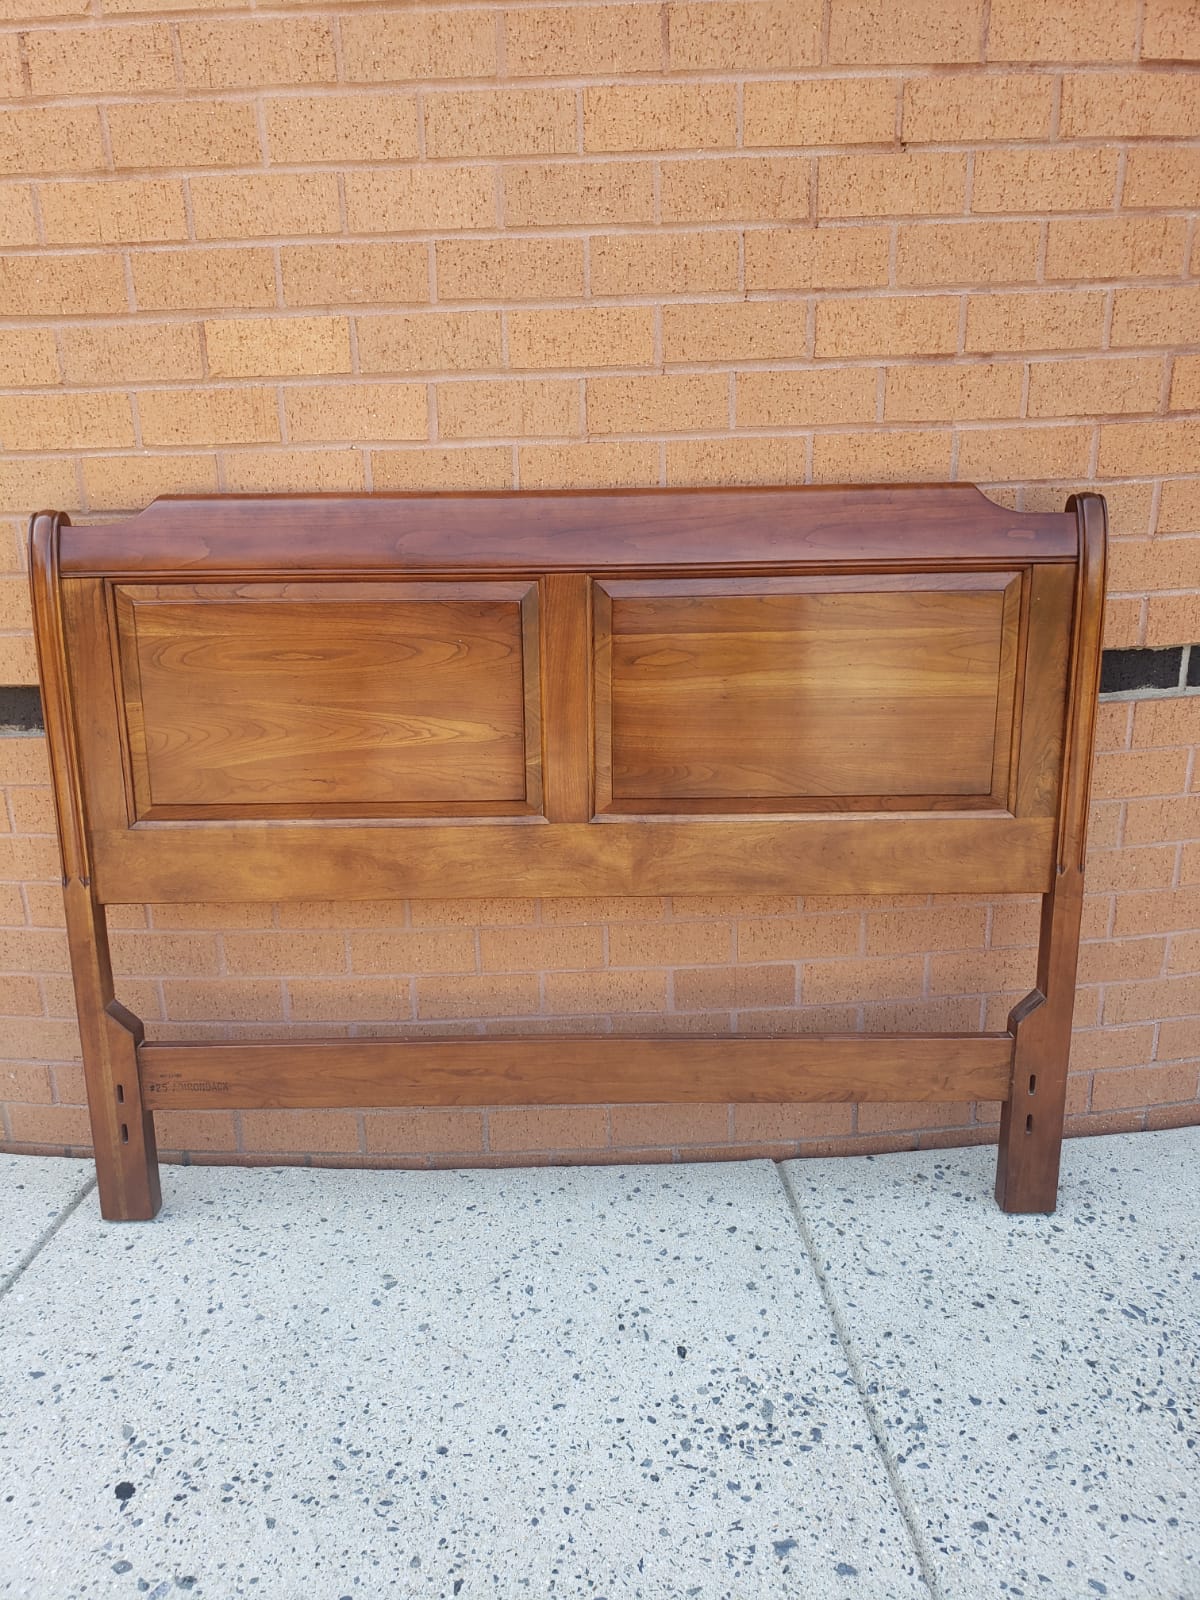 A federal style, solid cherry full size Headboard in very good condition by Stickley. Measures 56.5